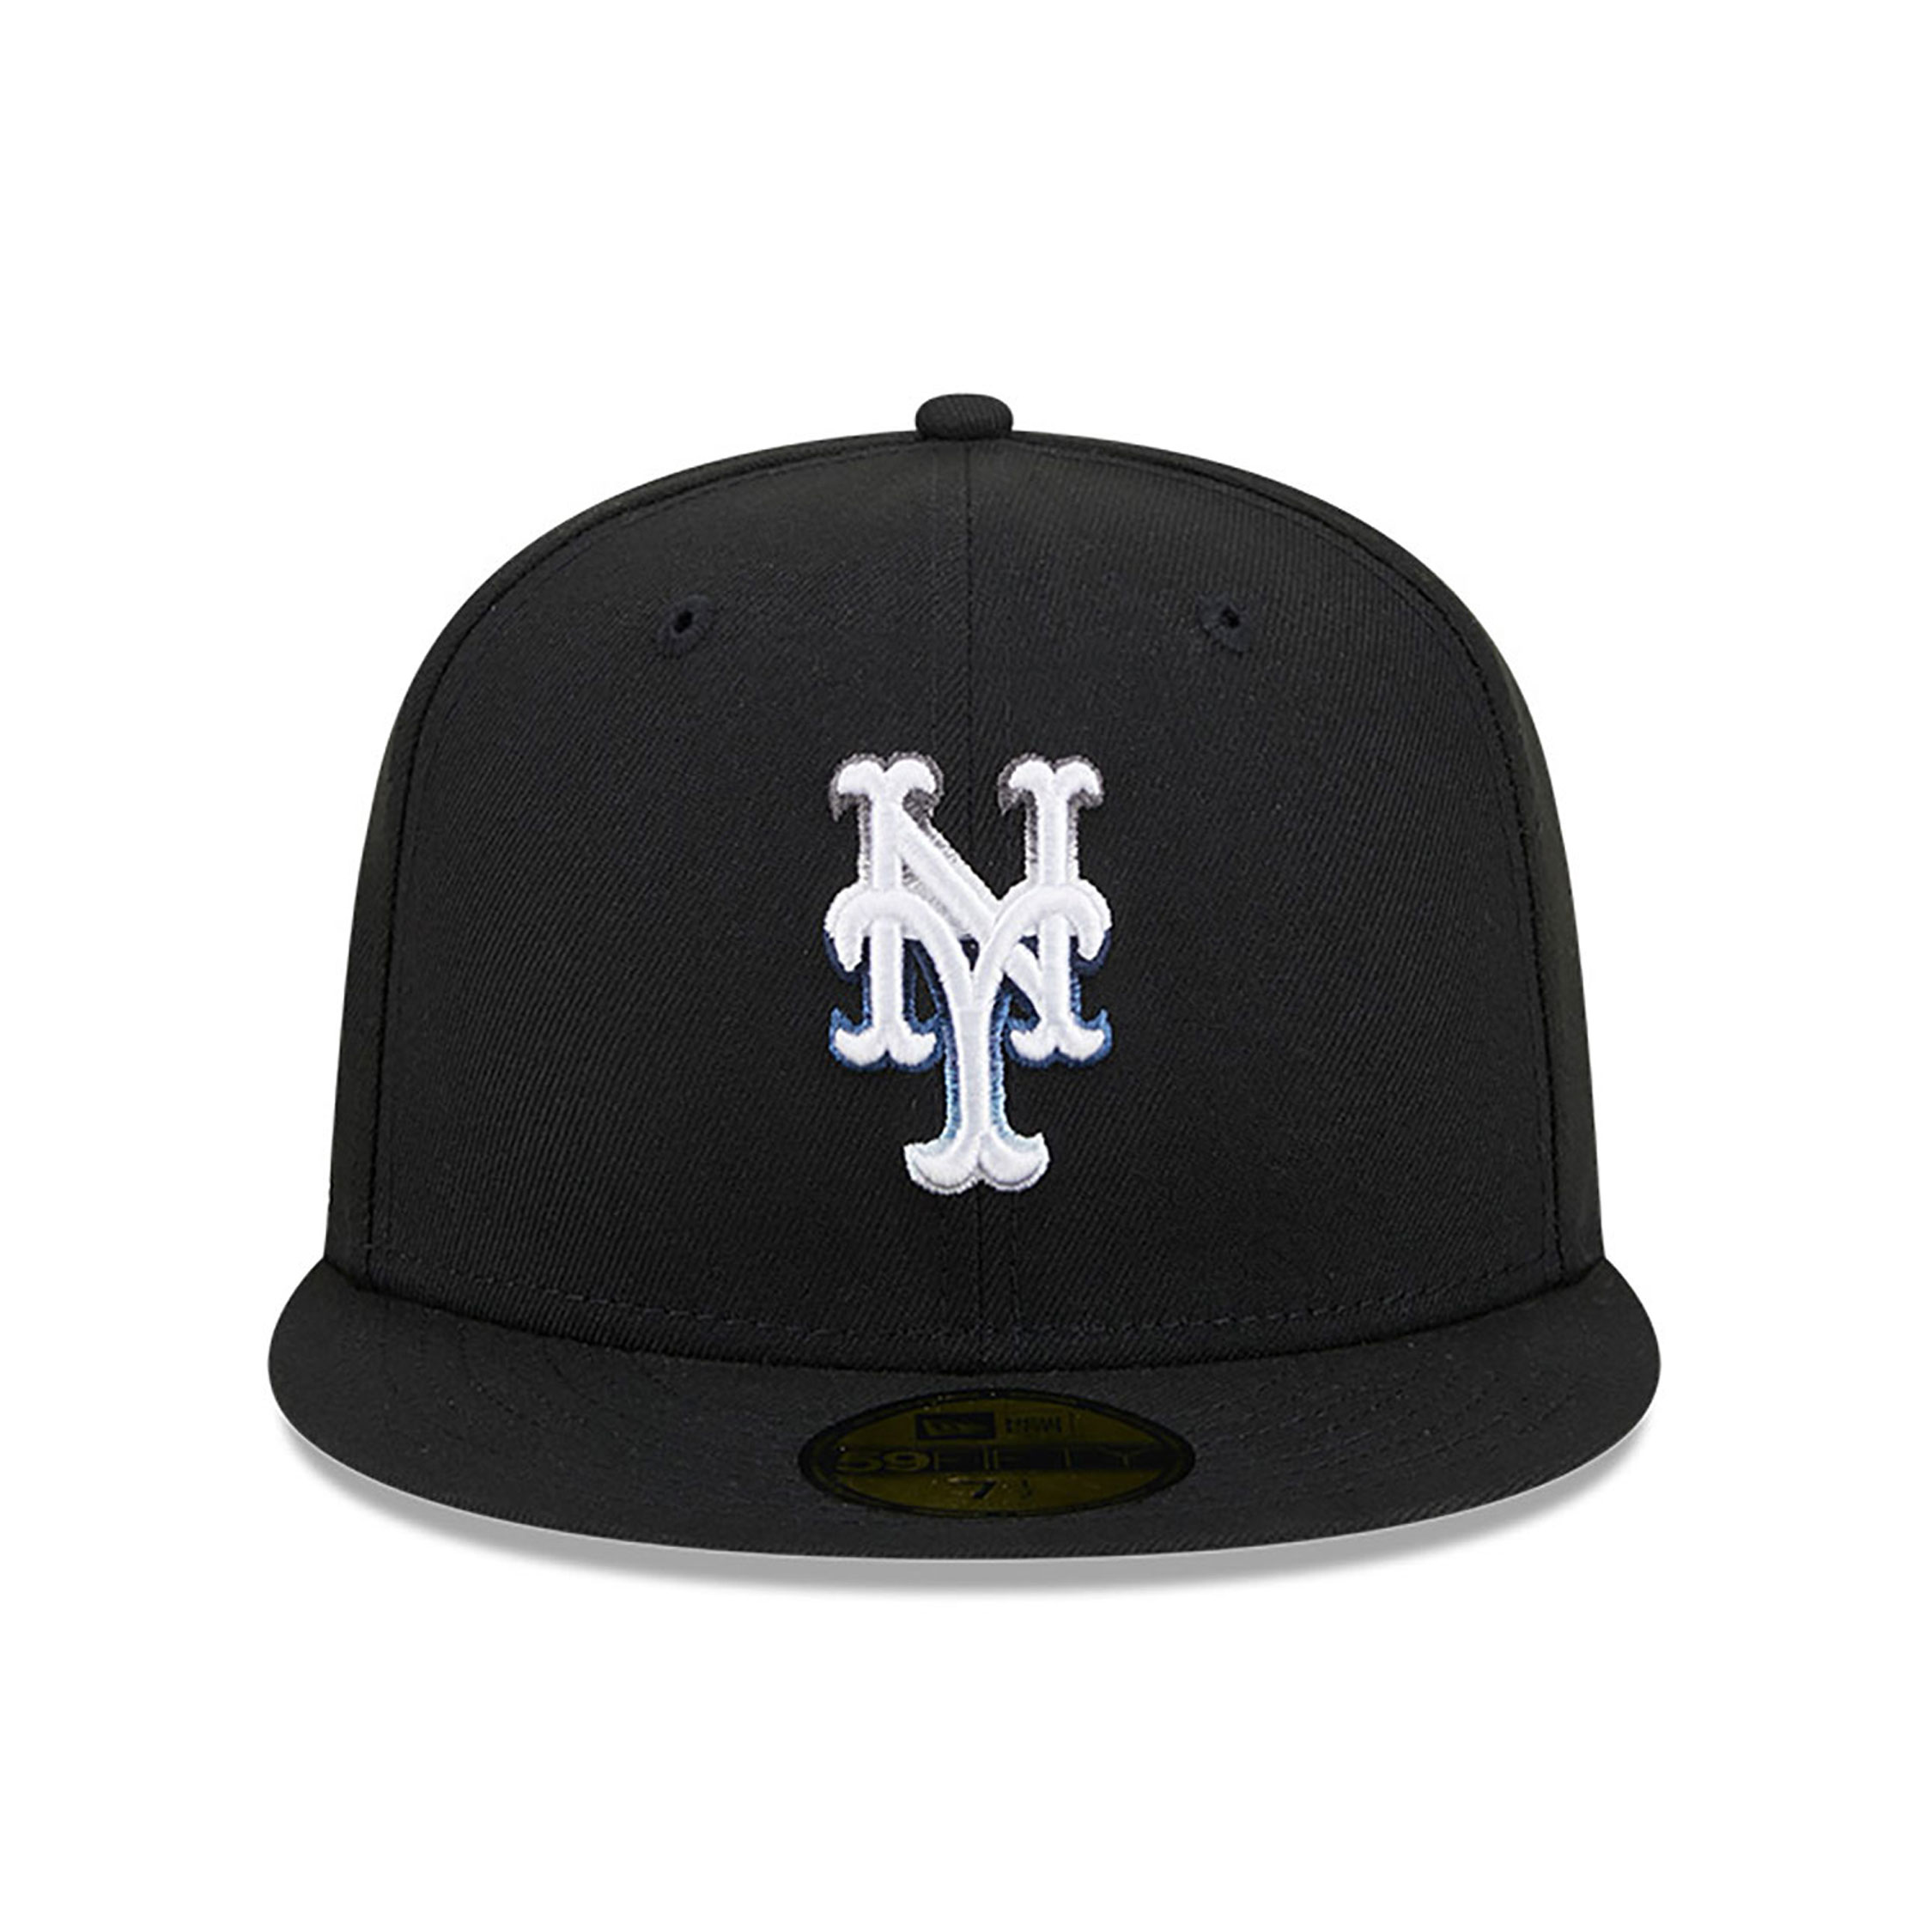 New York Mets Raceway Black 59FIFTY Fitted Cap